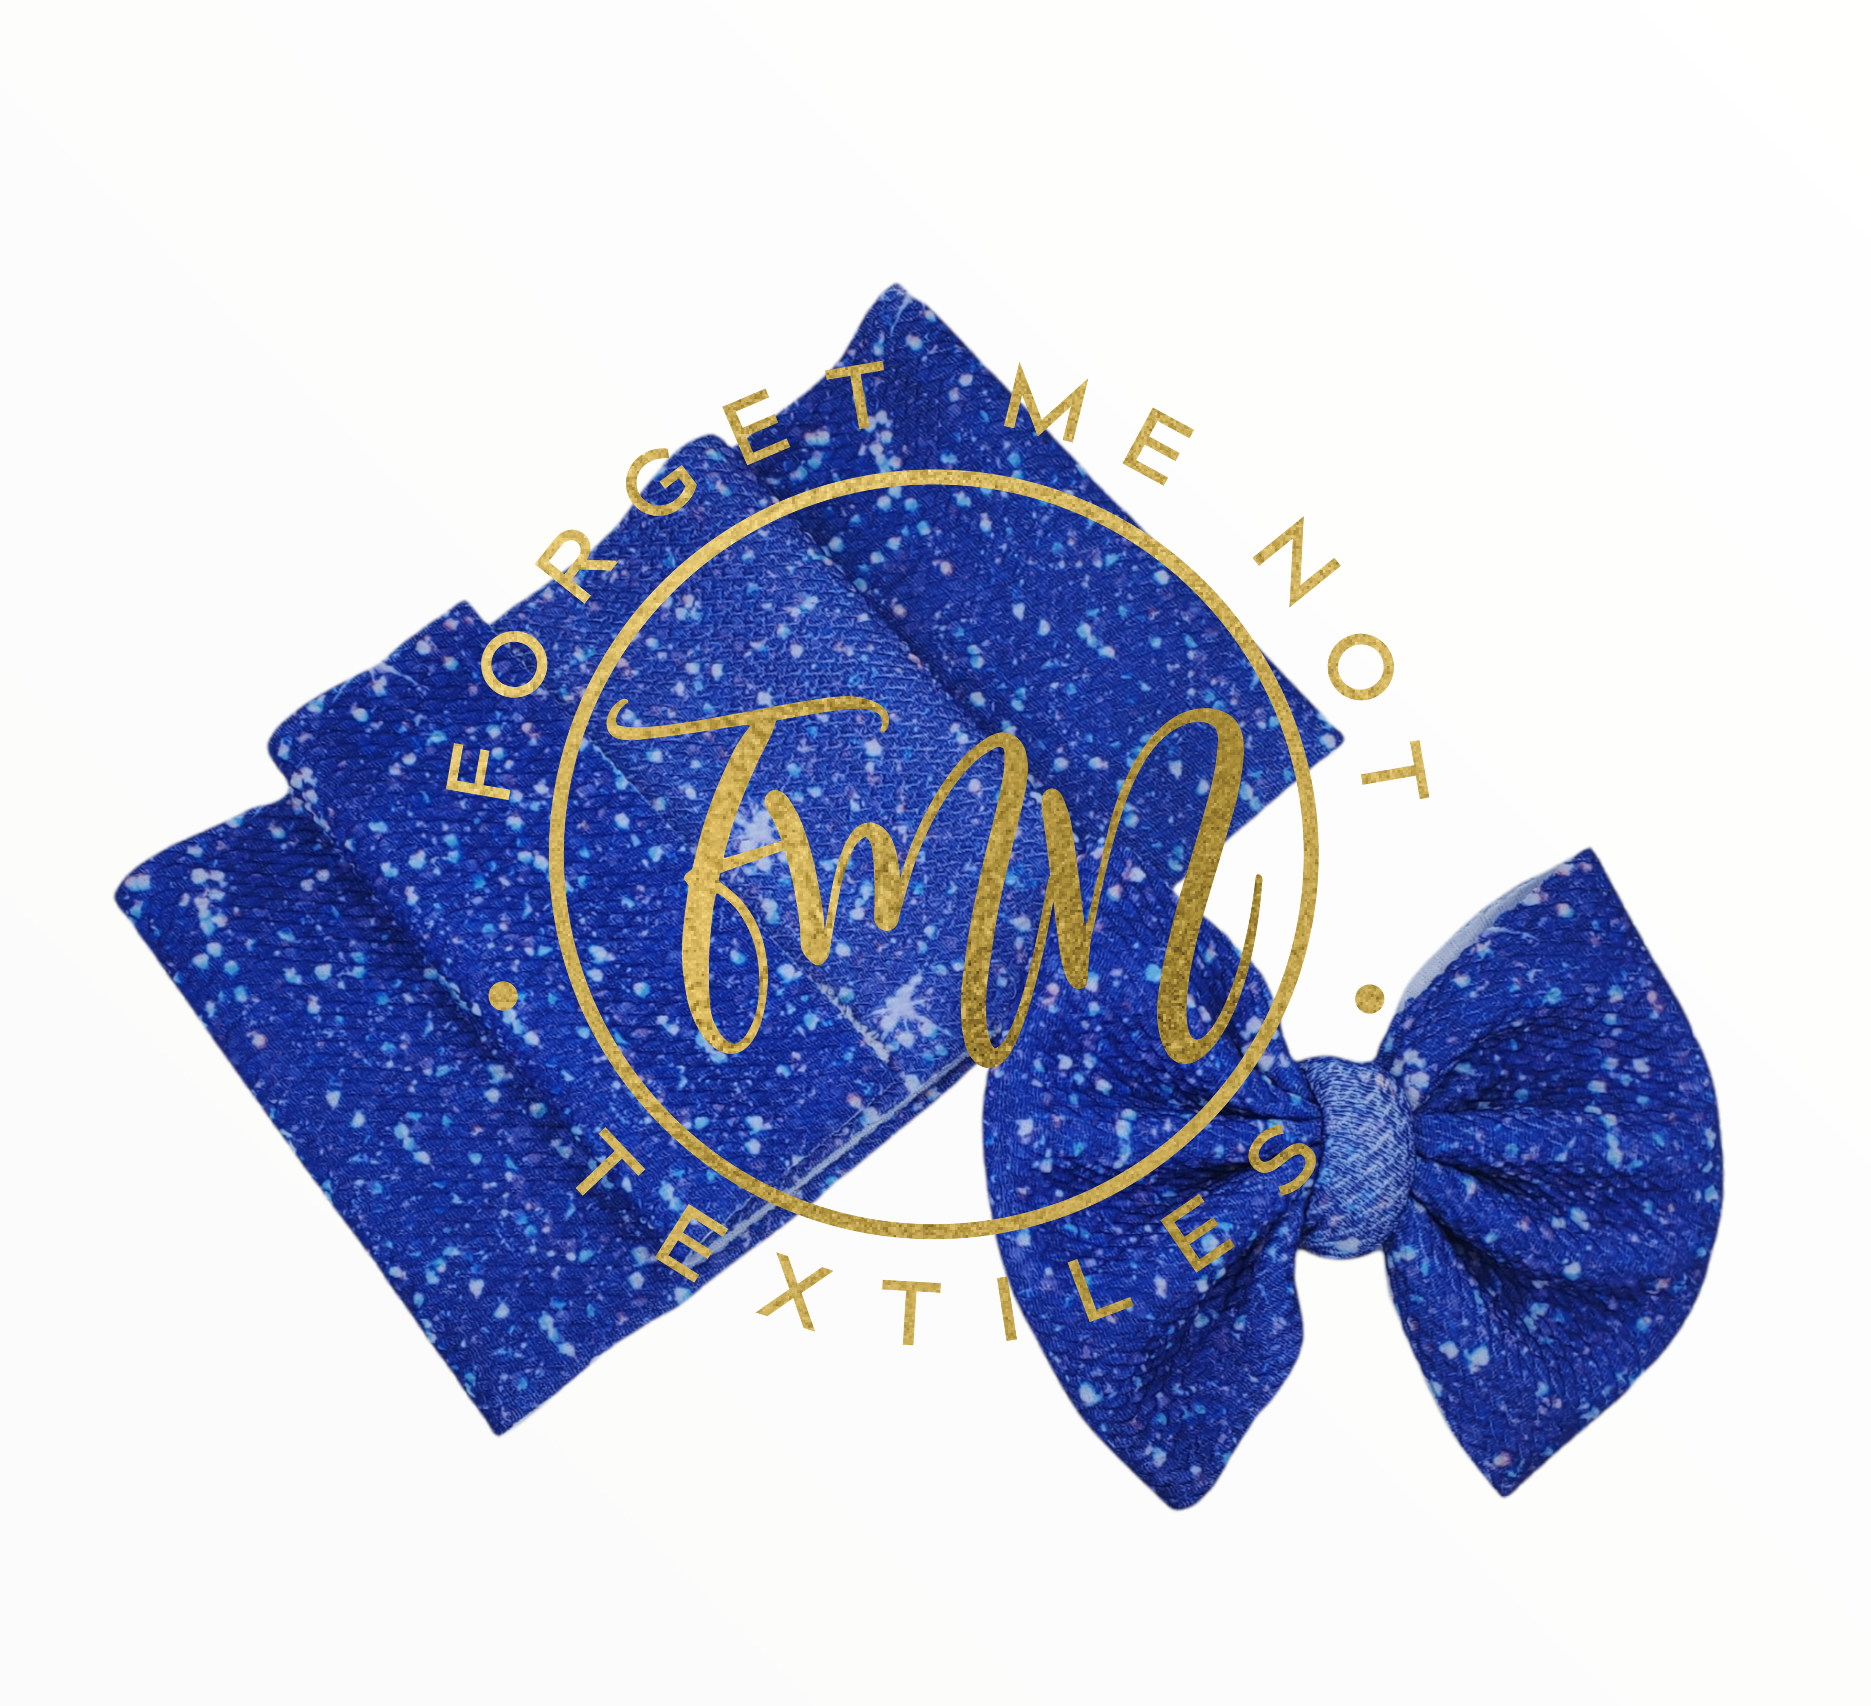 Ready To Bow Strip 5"x 60" American Blue Glitter Bullet